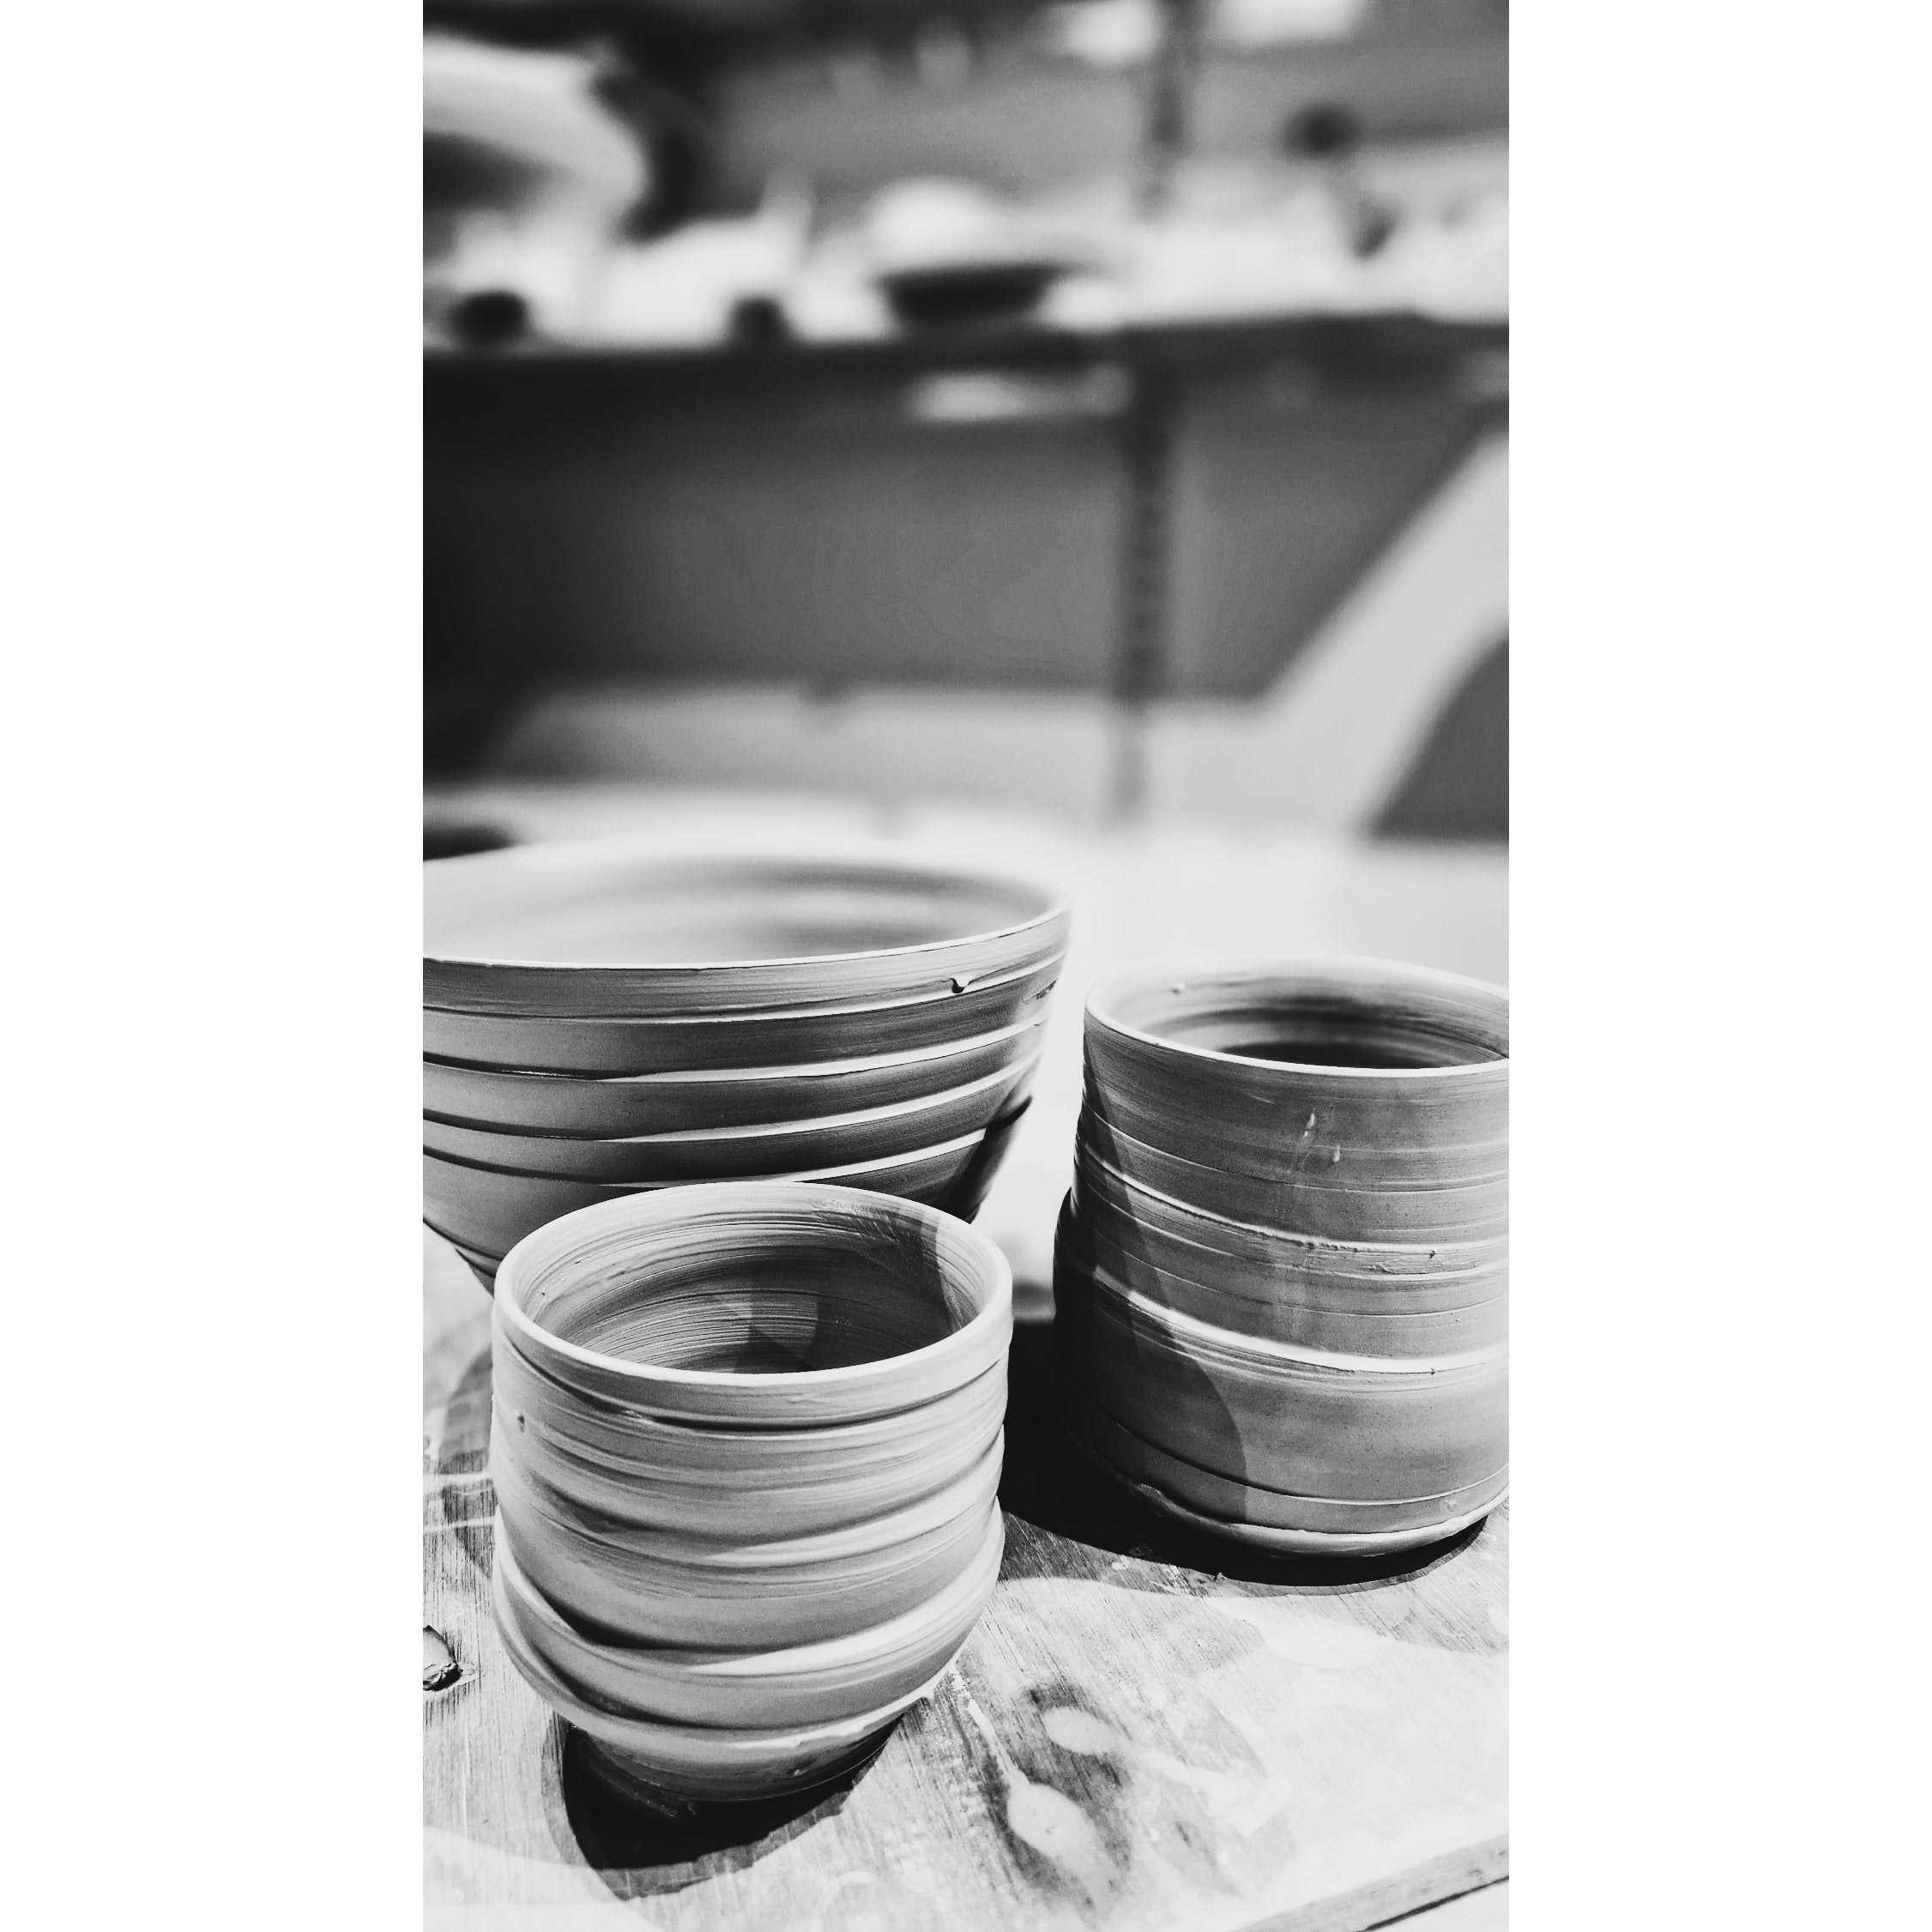 5 Week Improvers Pottery Course